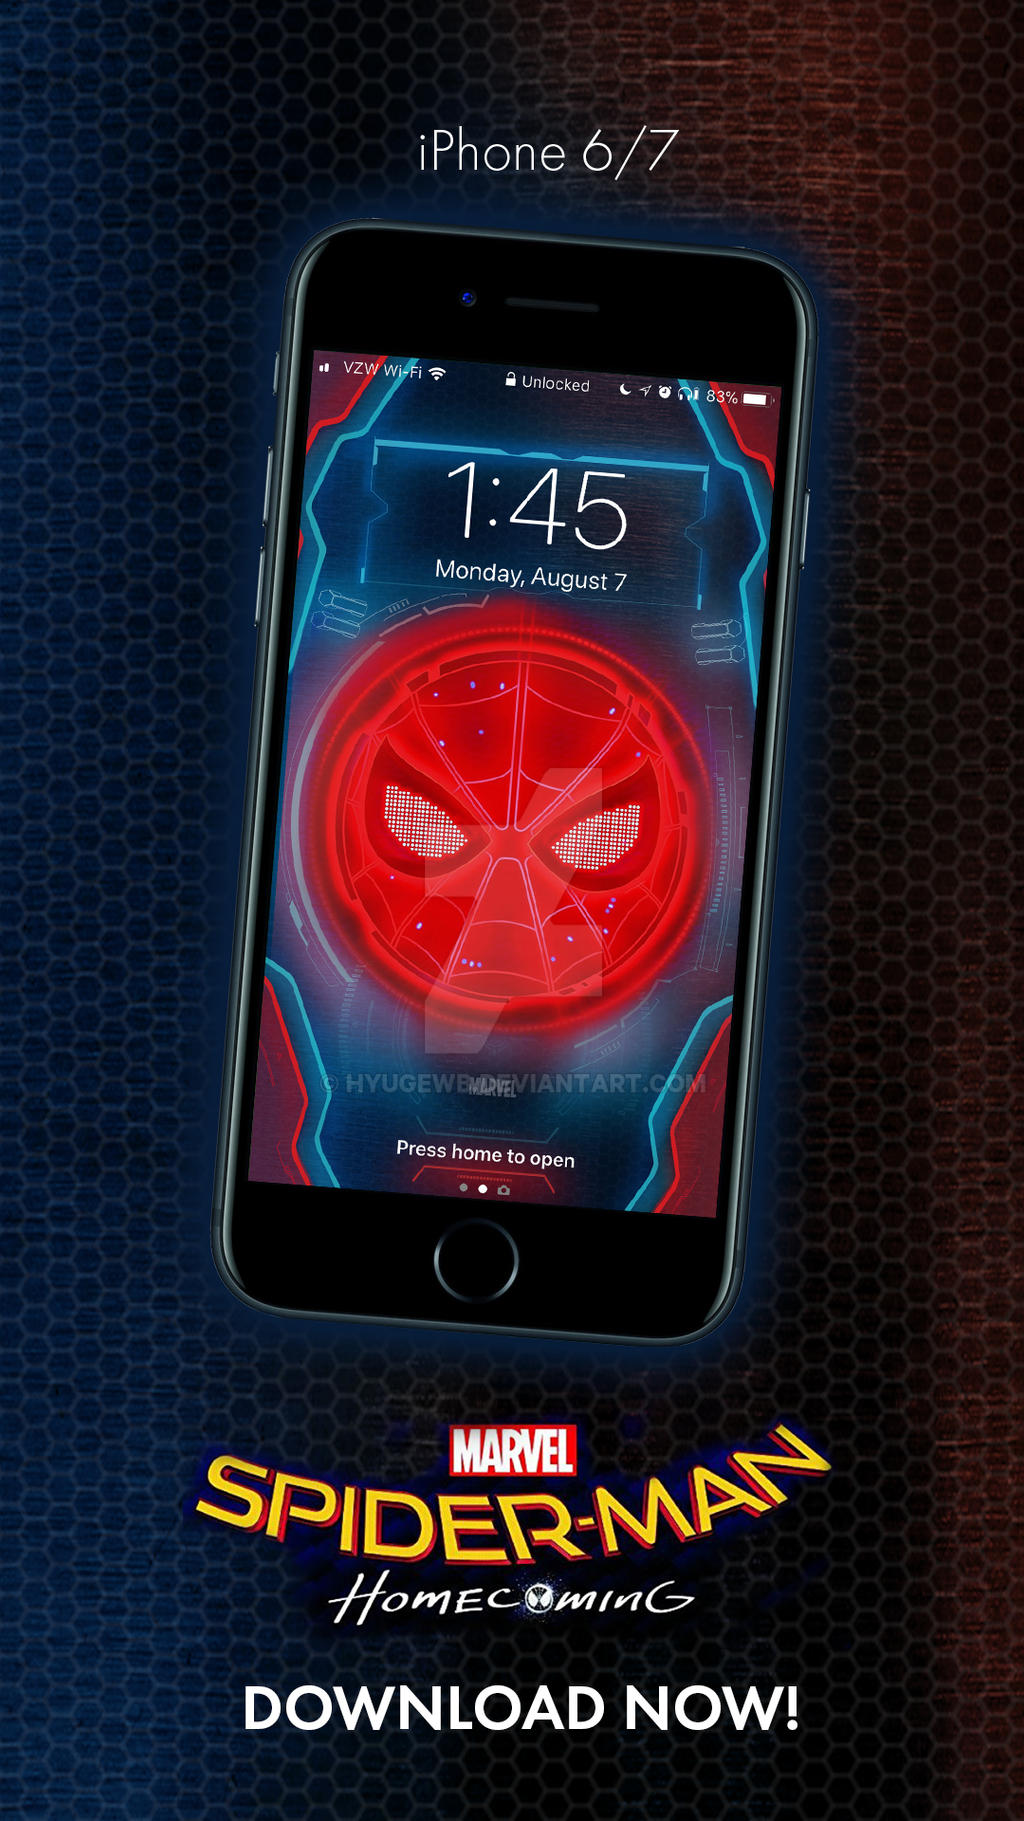 Spiderman Home Coming - iPhone 6/7 Wallpaper by hyugewb on DeviantArt